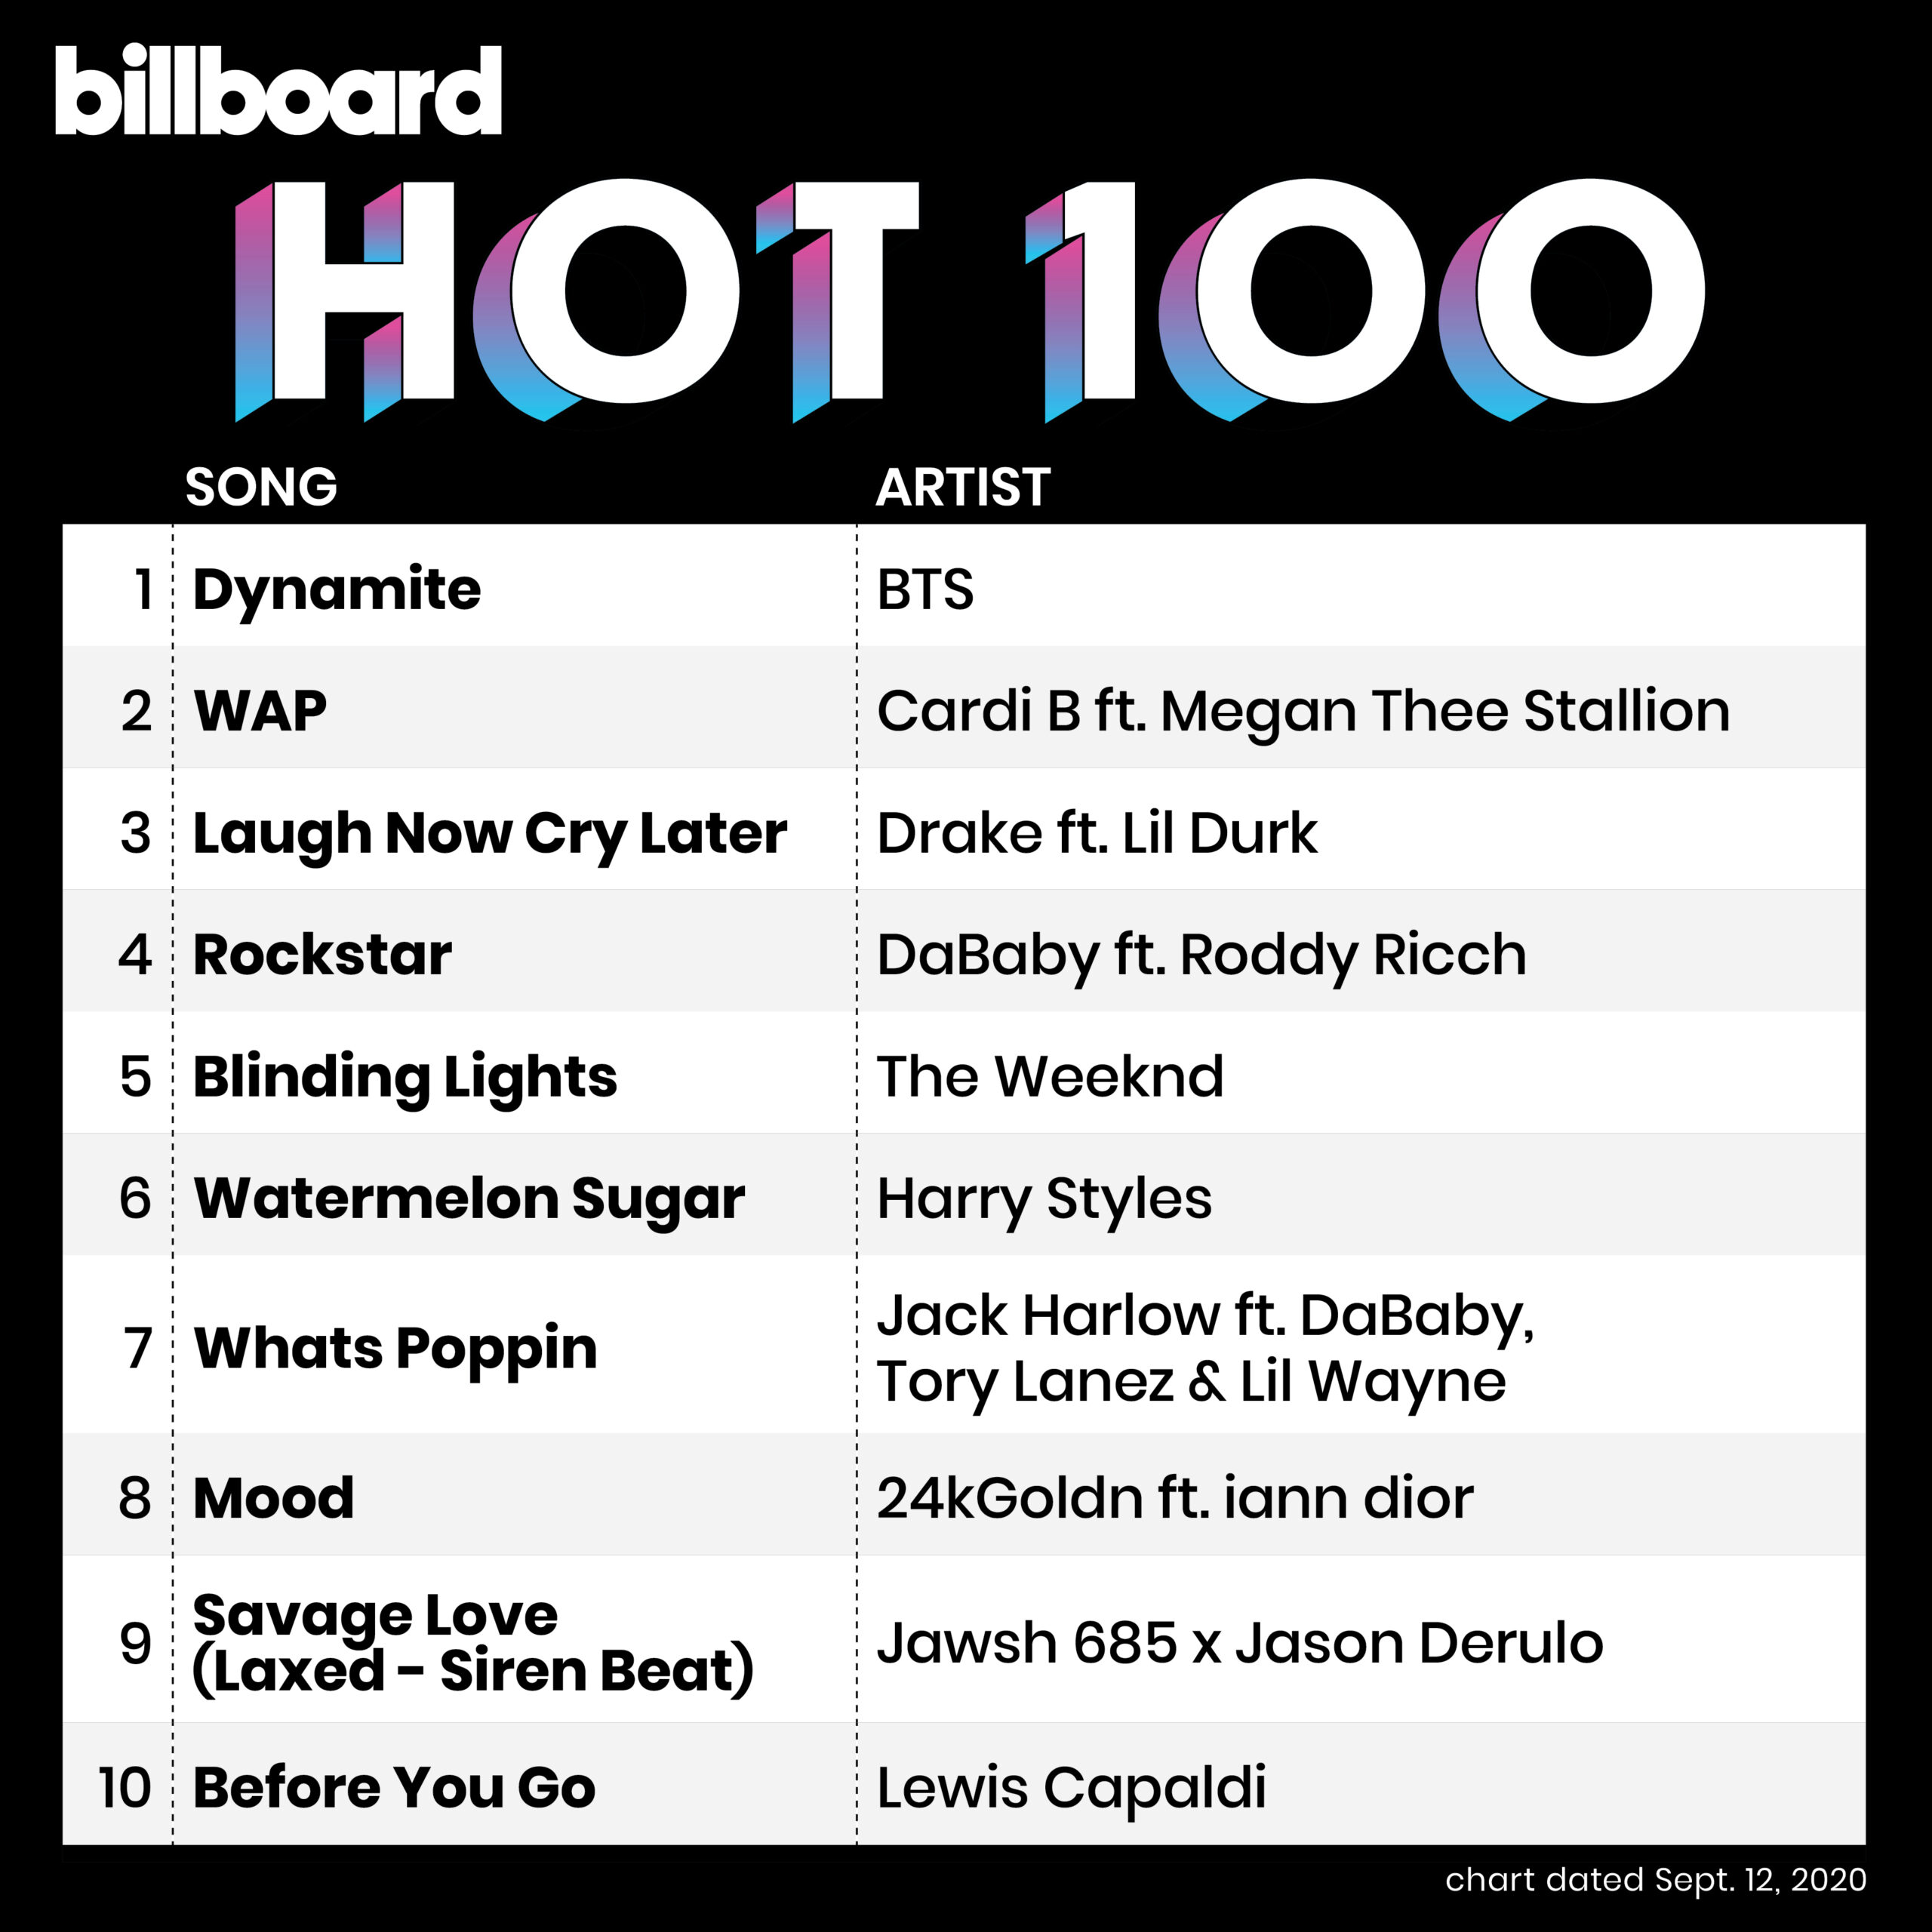 bts-dynamite-stays-on-1-of-billboard-hot-100-for-2nd-straight-week-3